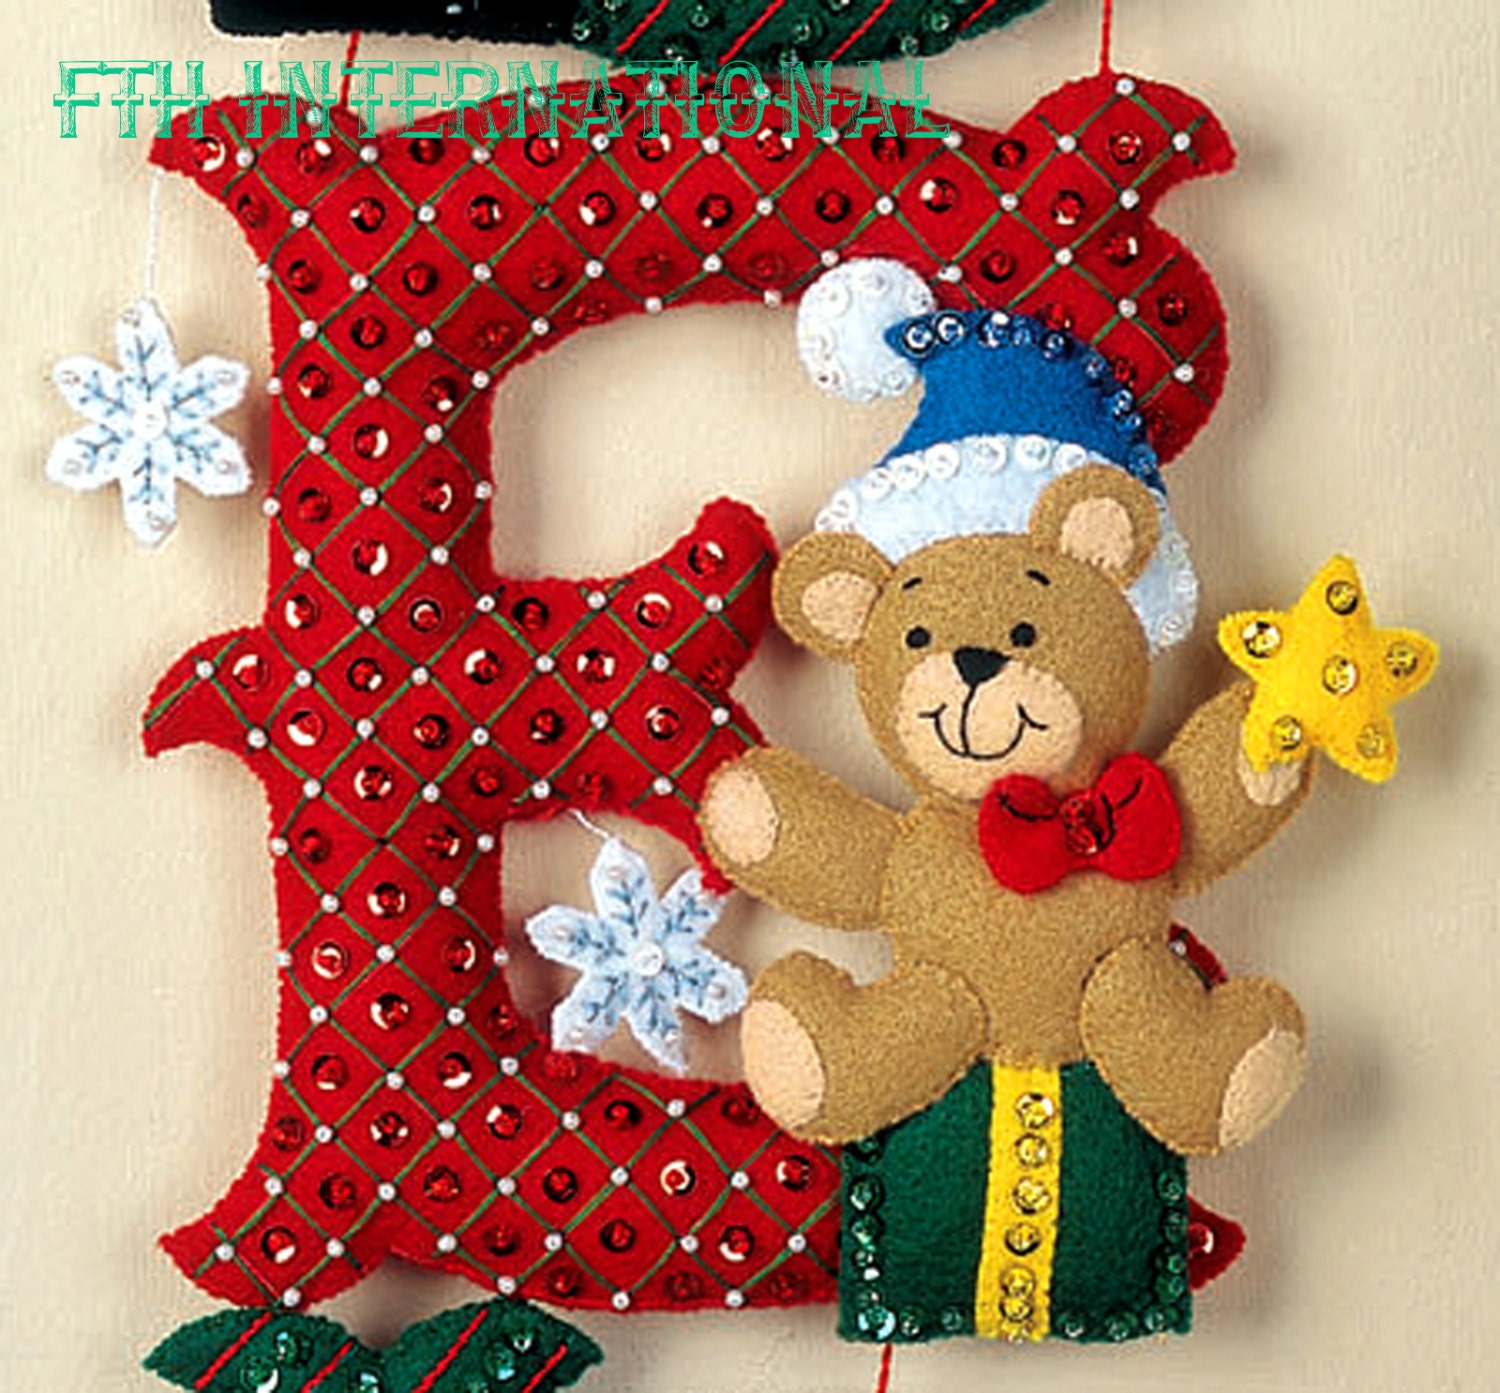 Bucilla Felt Applique Wall Hanging Kit, Noel, Perfect for Holiday DIY Arts  and Crafts, 89655E